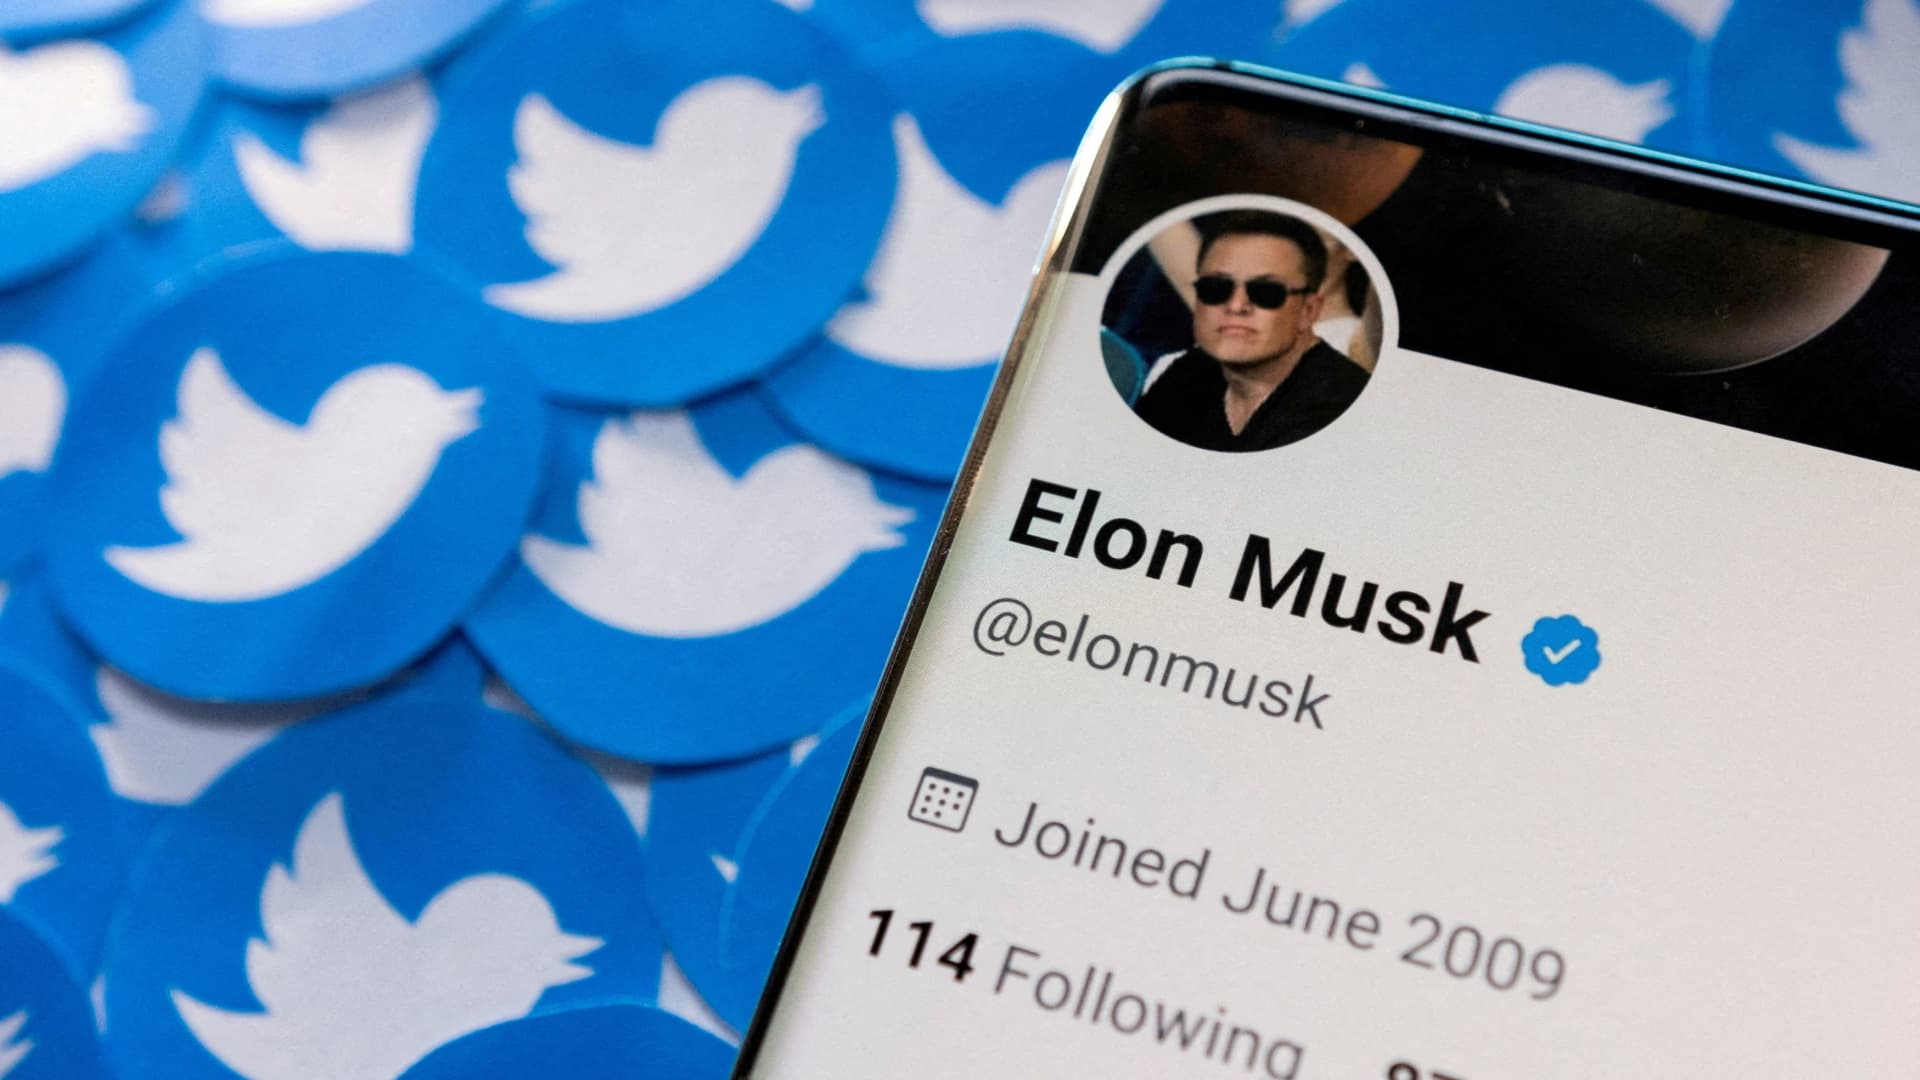 EU official warns Musk he'll have to 'fly by our rules' as he buys Twitter